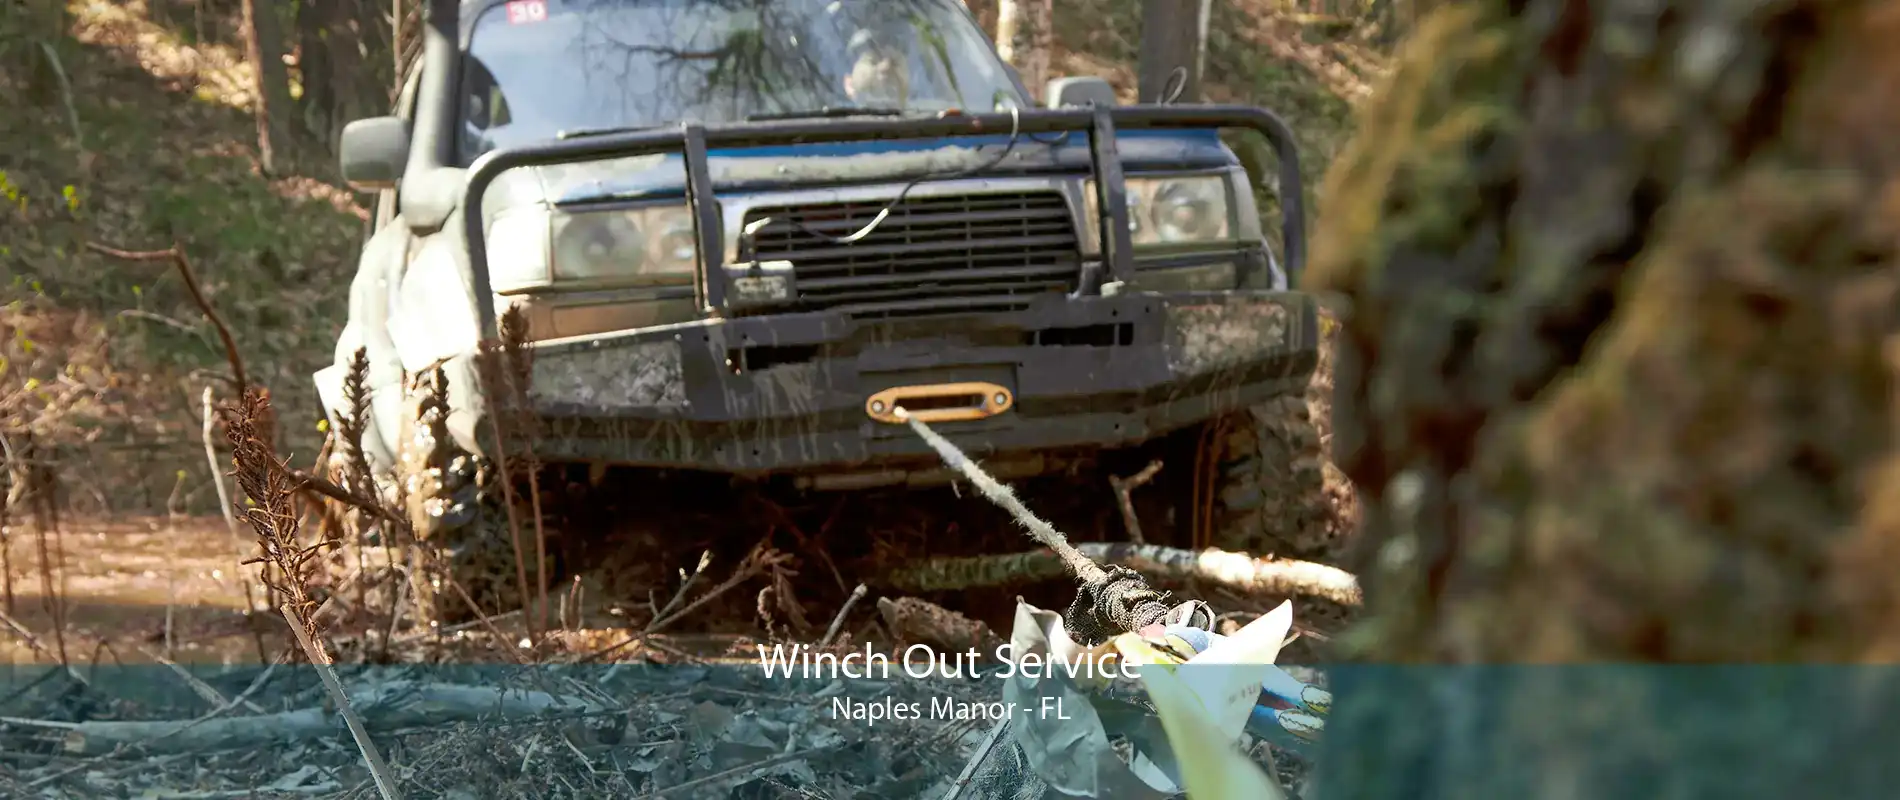 Winch Out Service Naples Manor - FL